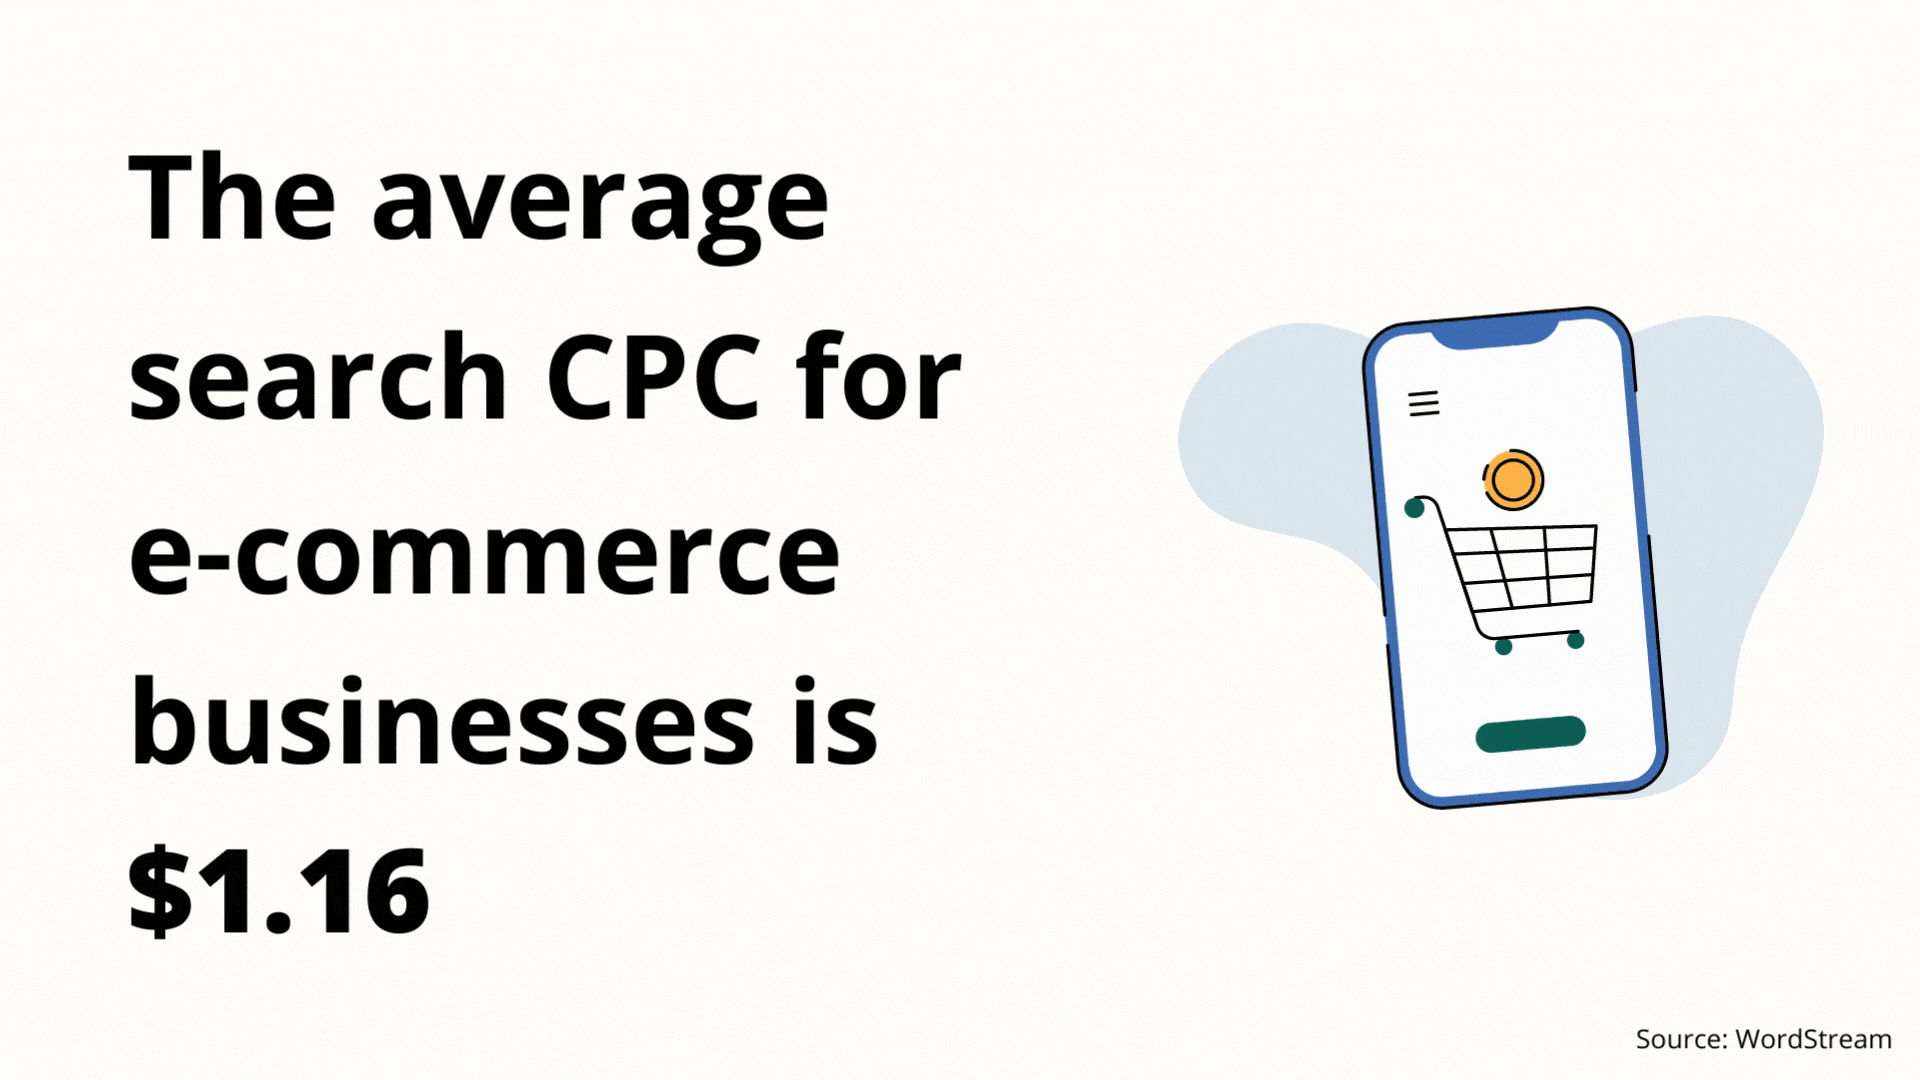 The average search CPC for e-commerce businesses is $1.16